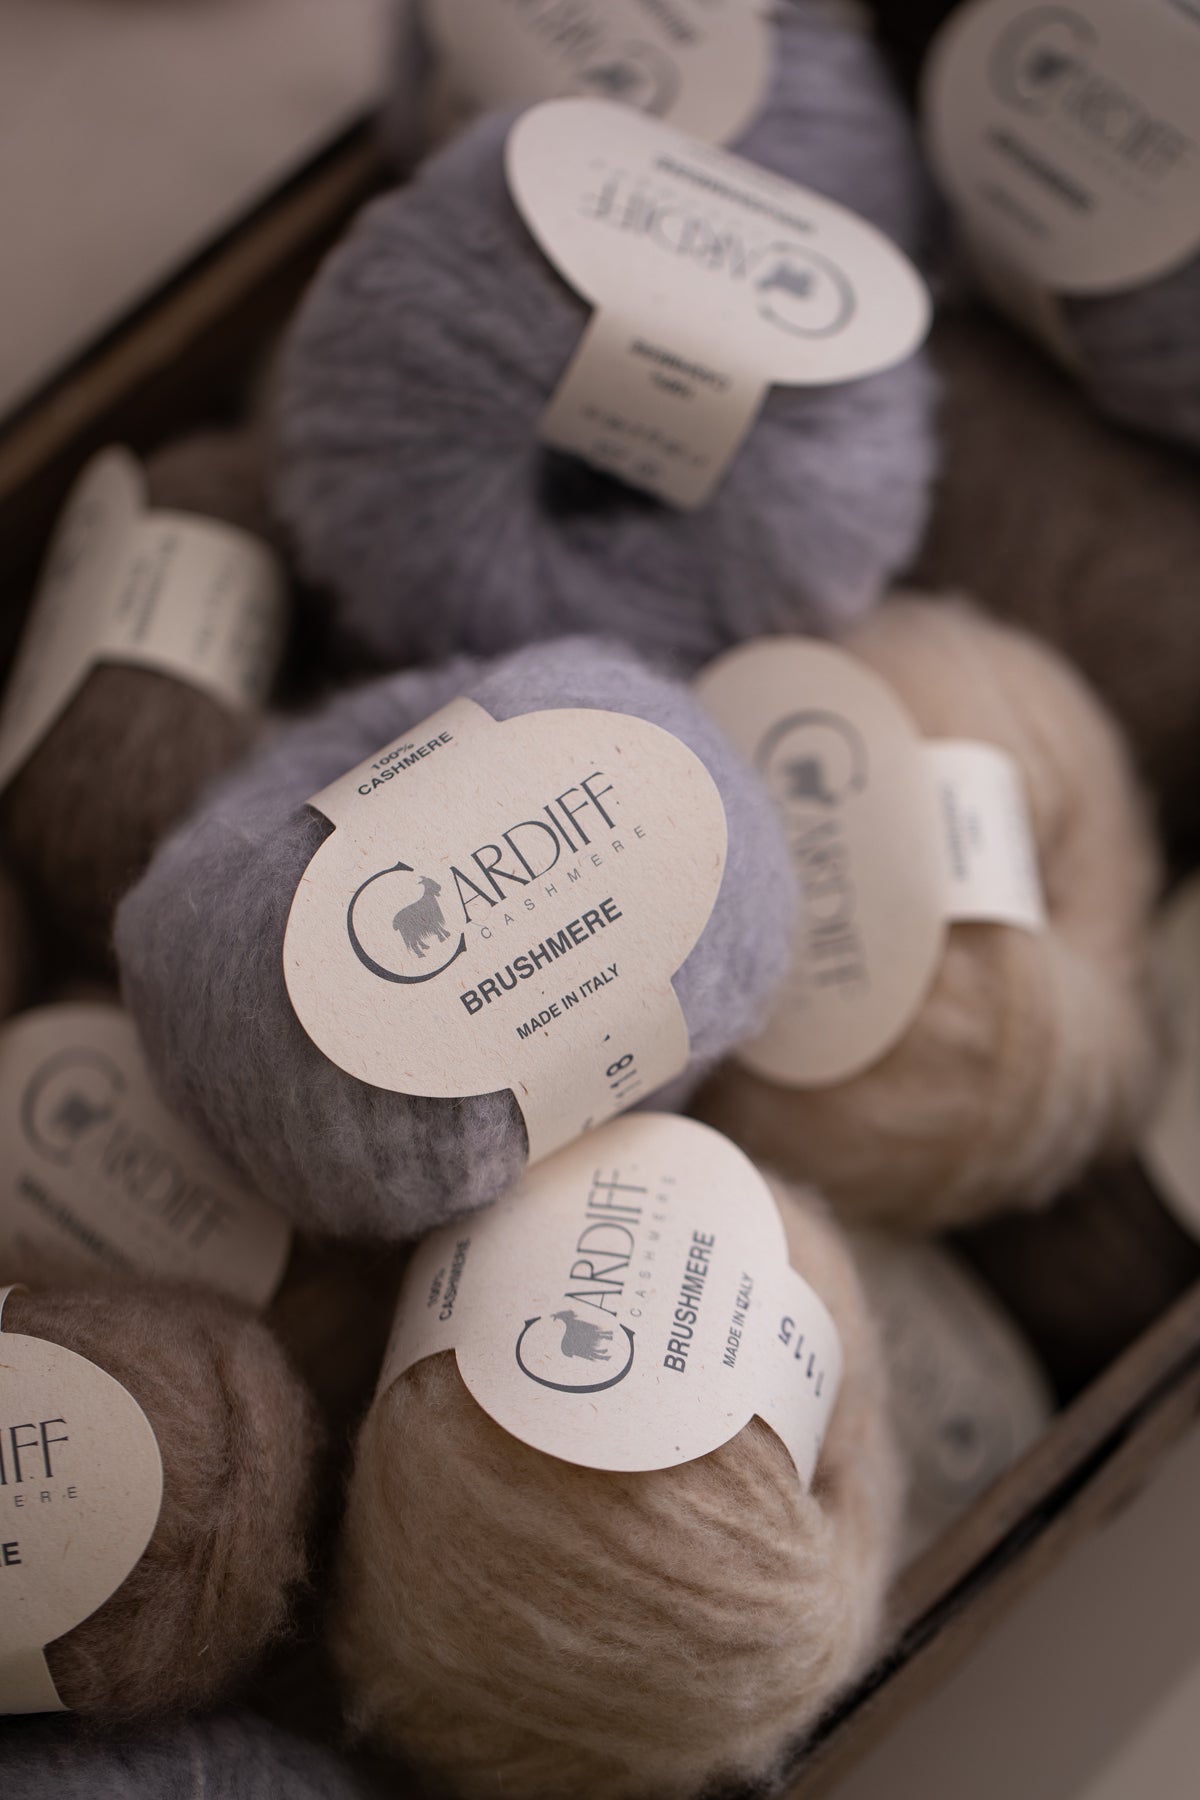 Cardiff BRUSHMERE - a bunch of gentle yarn balls comp: 100% Cashmere